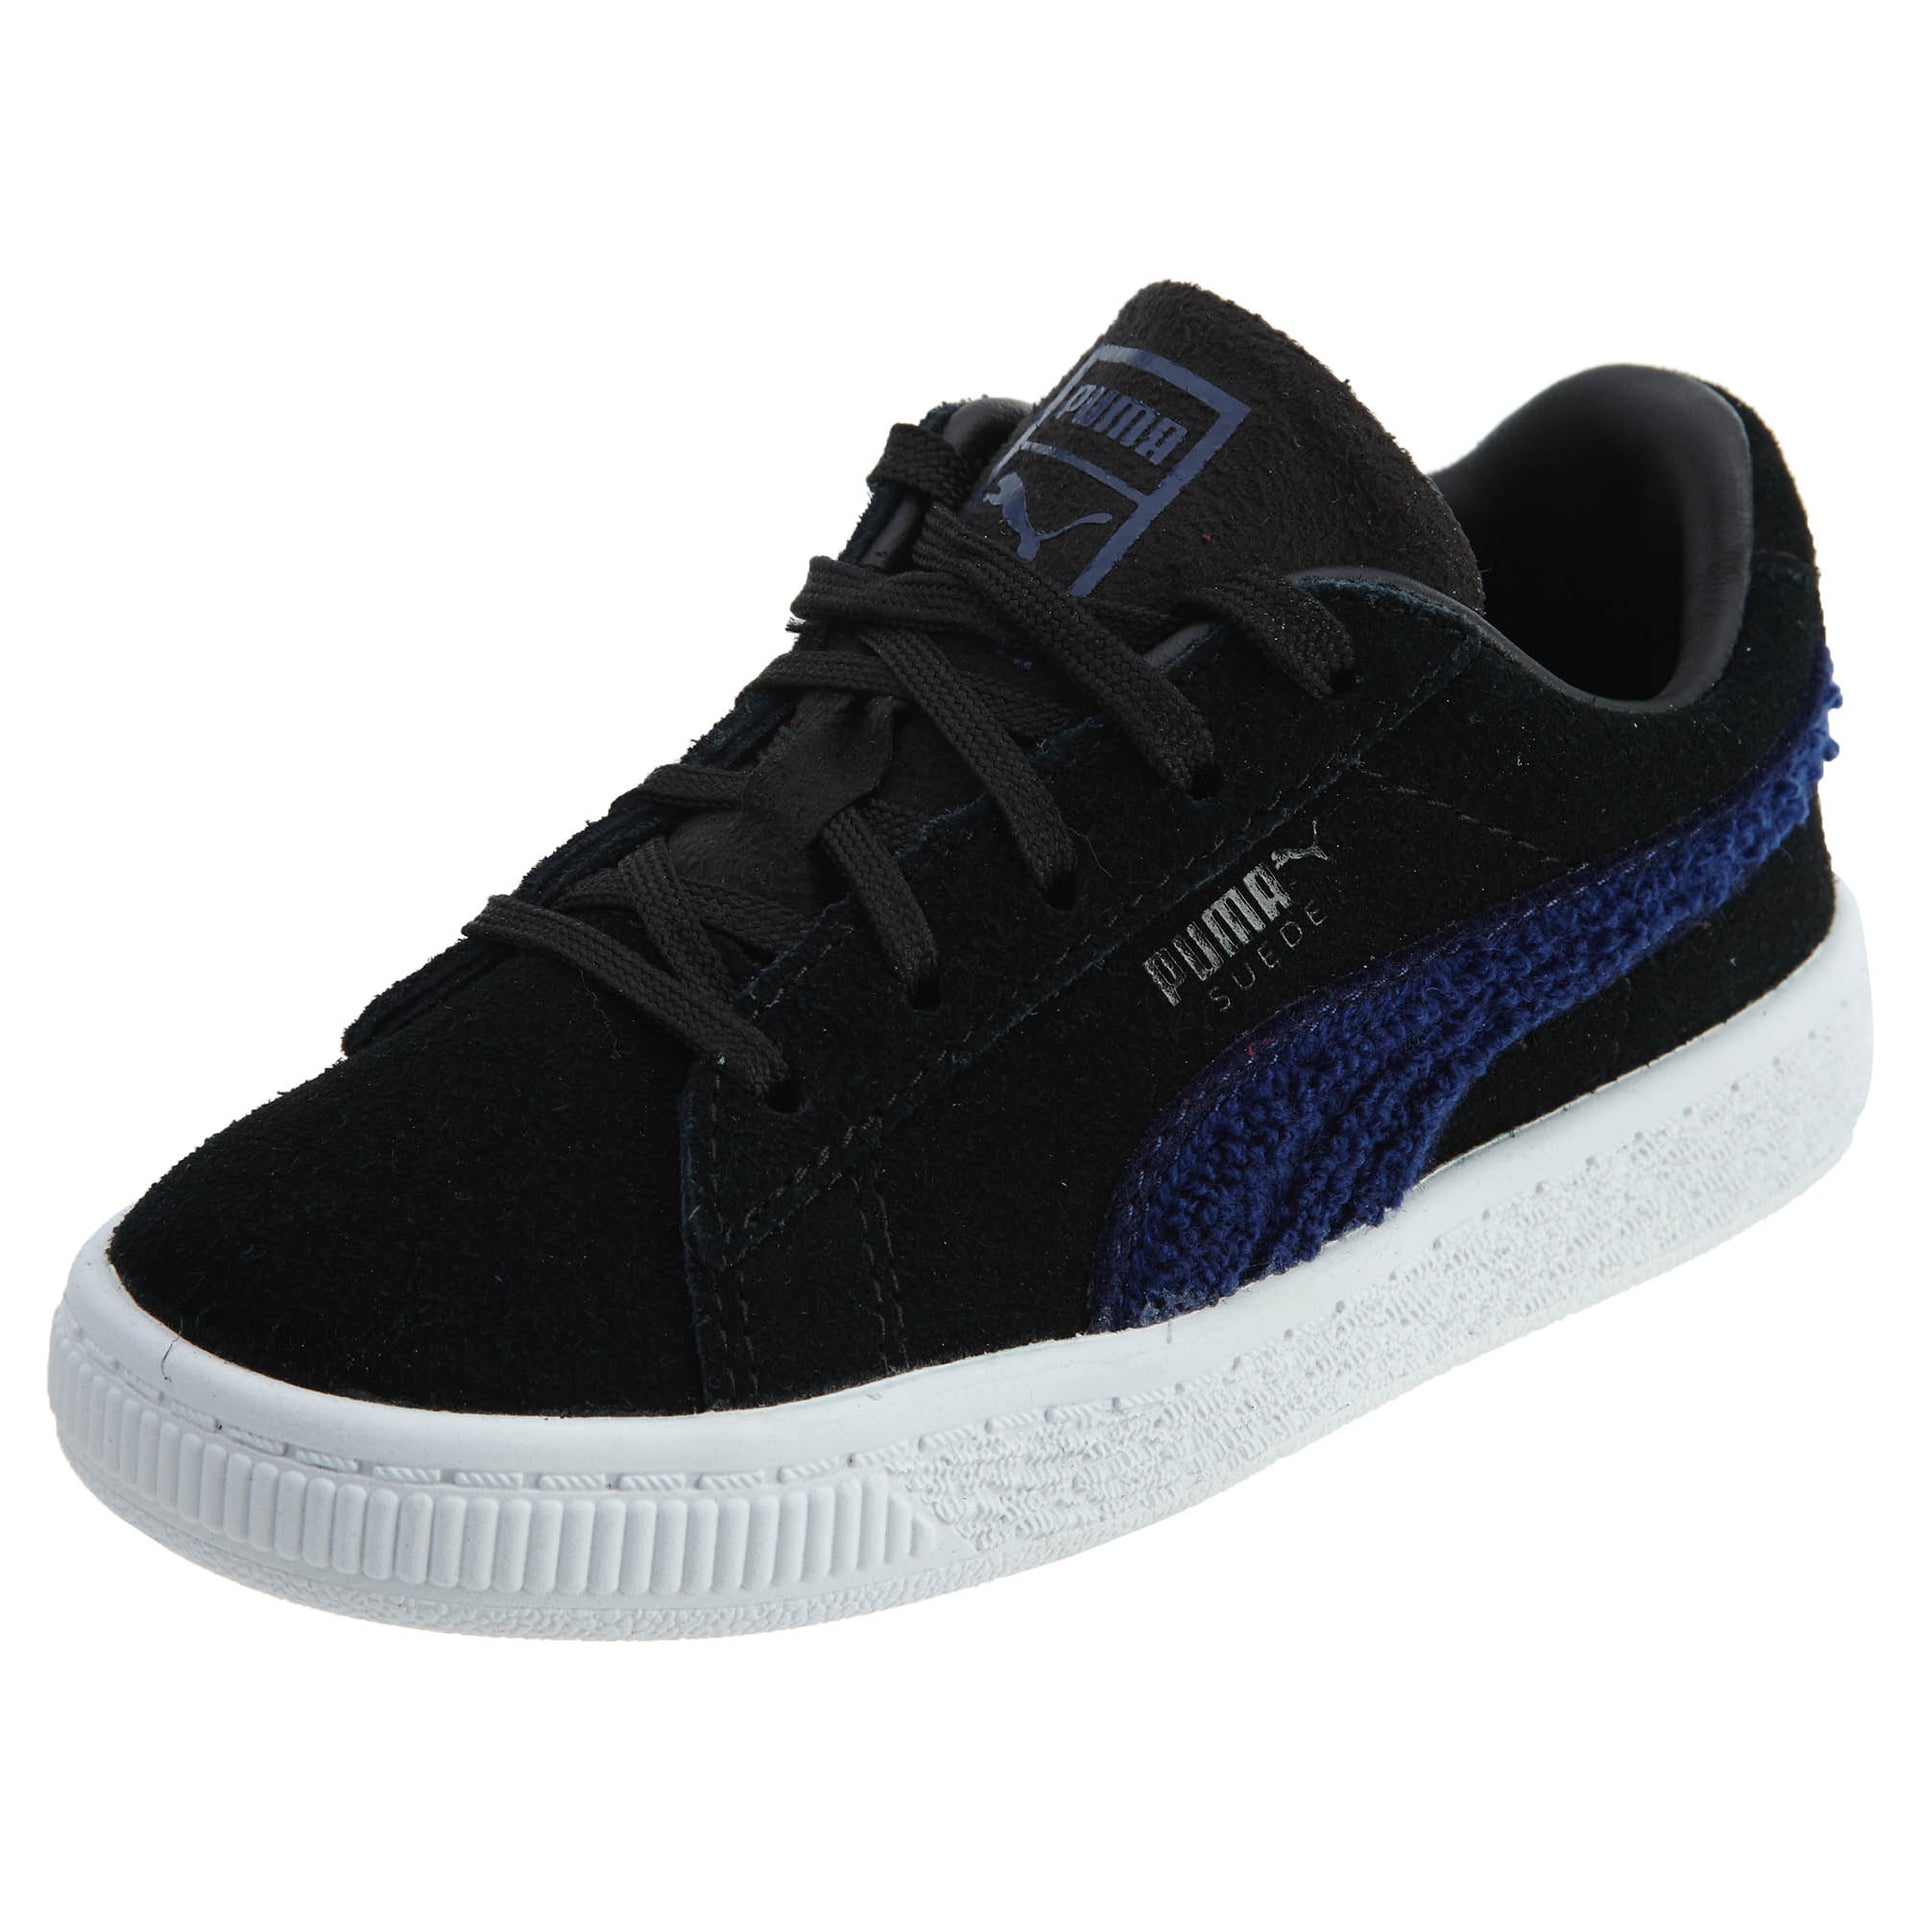 Puma Suede Classic Terry Infant Sneaker Toddlers Style : 363909